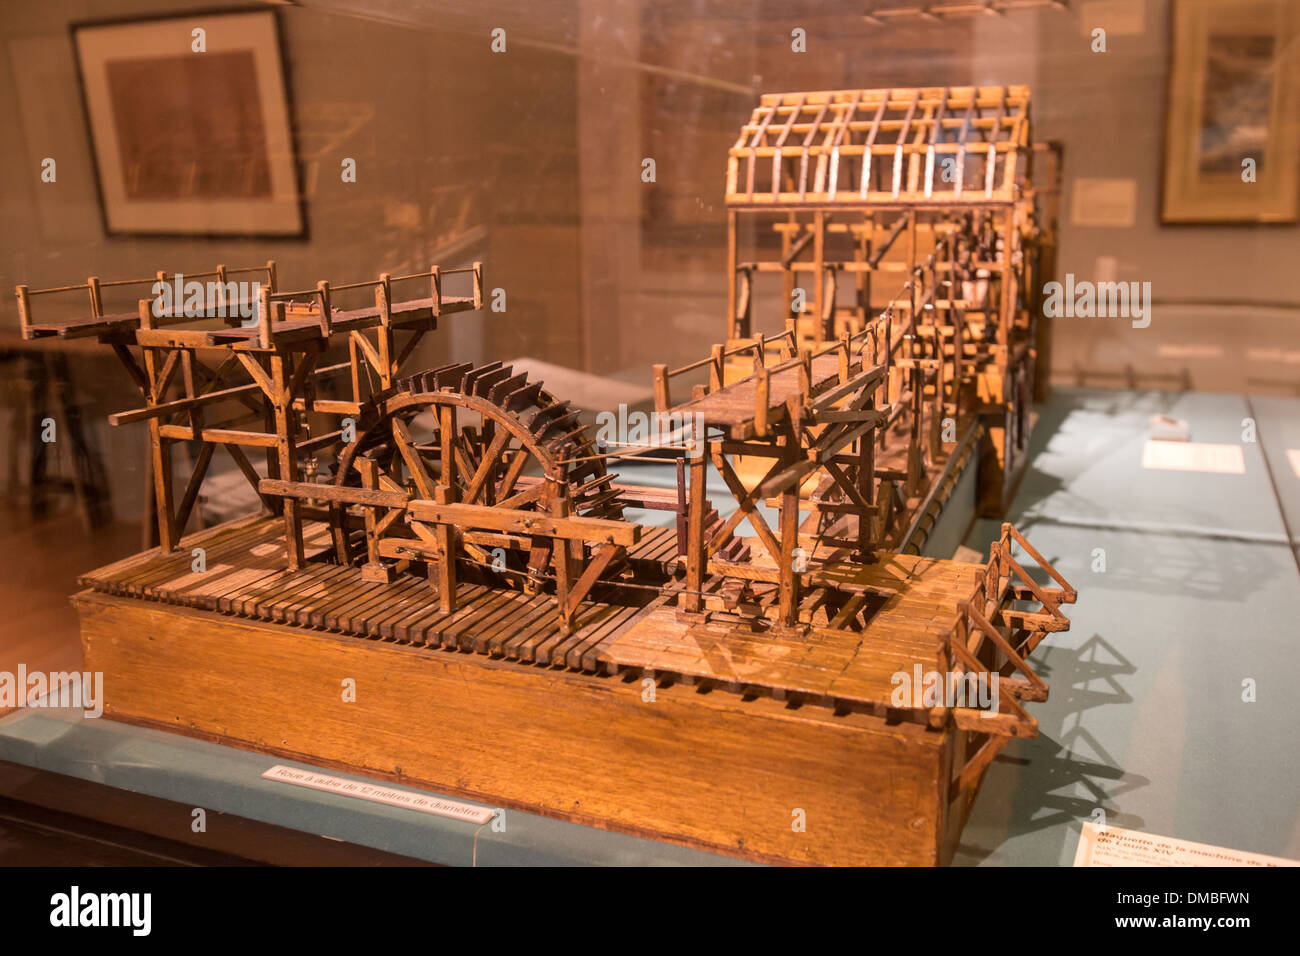 MODEL OF THE MACHINE IN MARLY BUILT BETWEEN 1681 AND 1682, RECREATION OF THE SYSTEM FOR PUMPING WATER FROM THE SEINE TO THE GARDENS OF THE CHATEAU OF MARLY-LE-ROI AND THE PARK OF VERSAILLES, PROMENADE MUSEUM, ROYAL PARK OF MARLY, NATIONAL ESTATE OF MARLY- Stock Photo